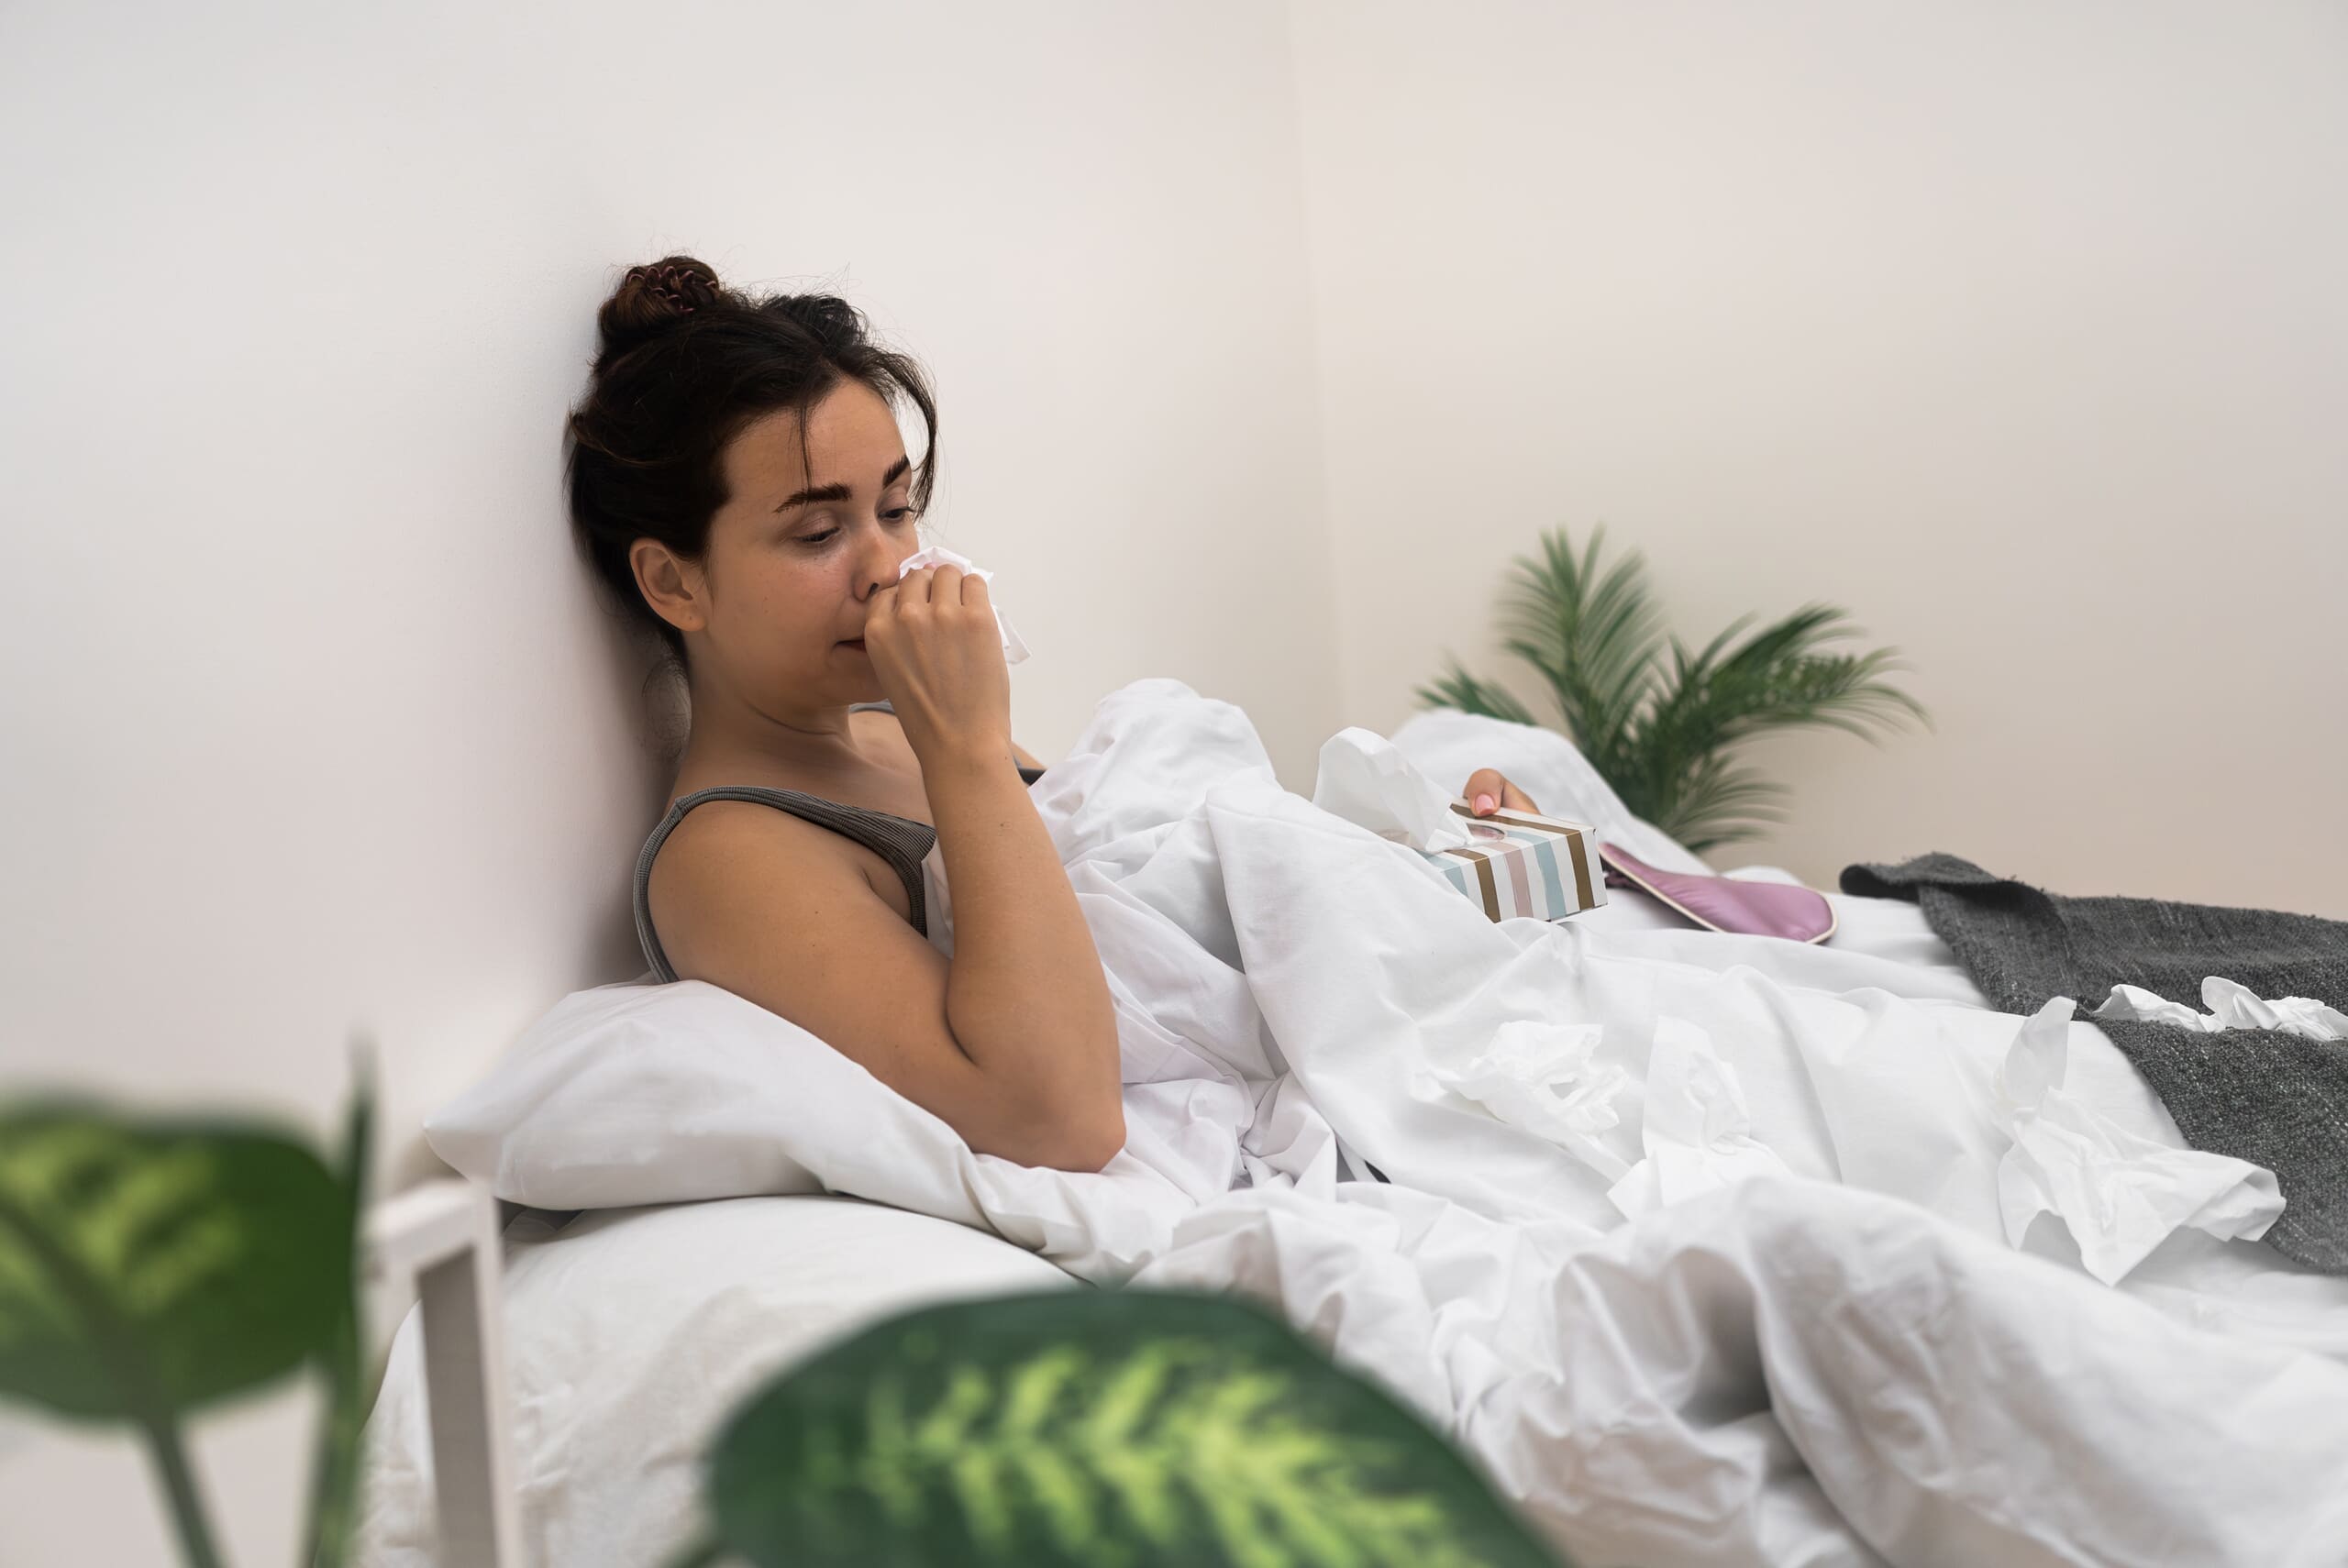 Woman holding tissue to her nose laying in bed.